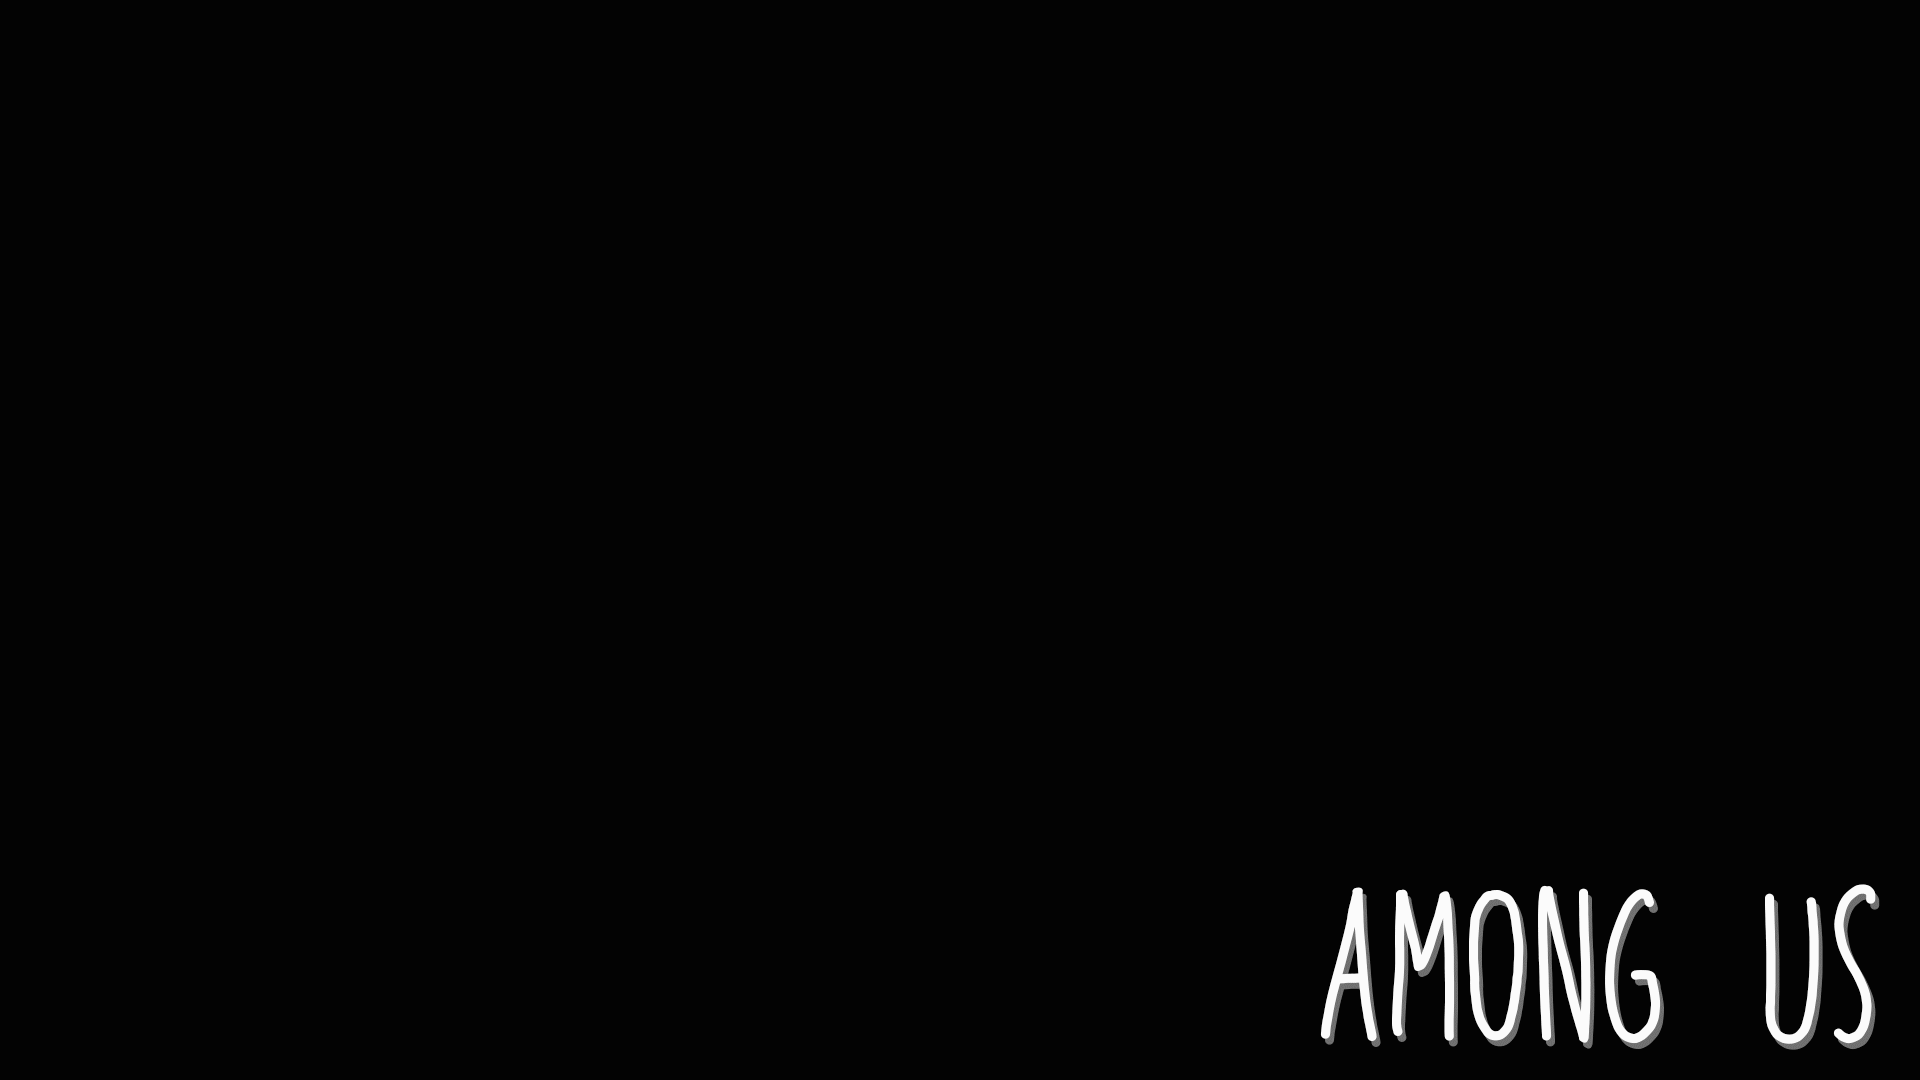 Among US GIF Wallpaper by Spexxiee on DeviantArt